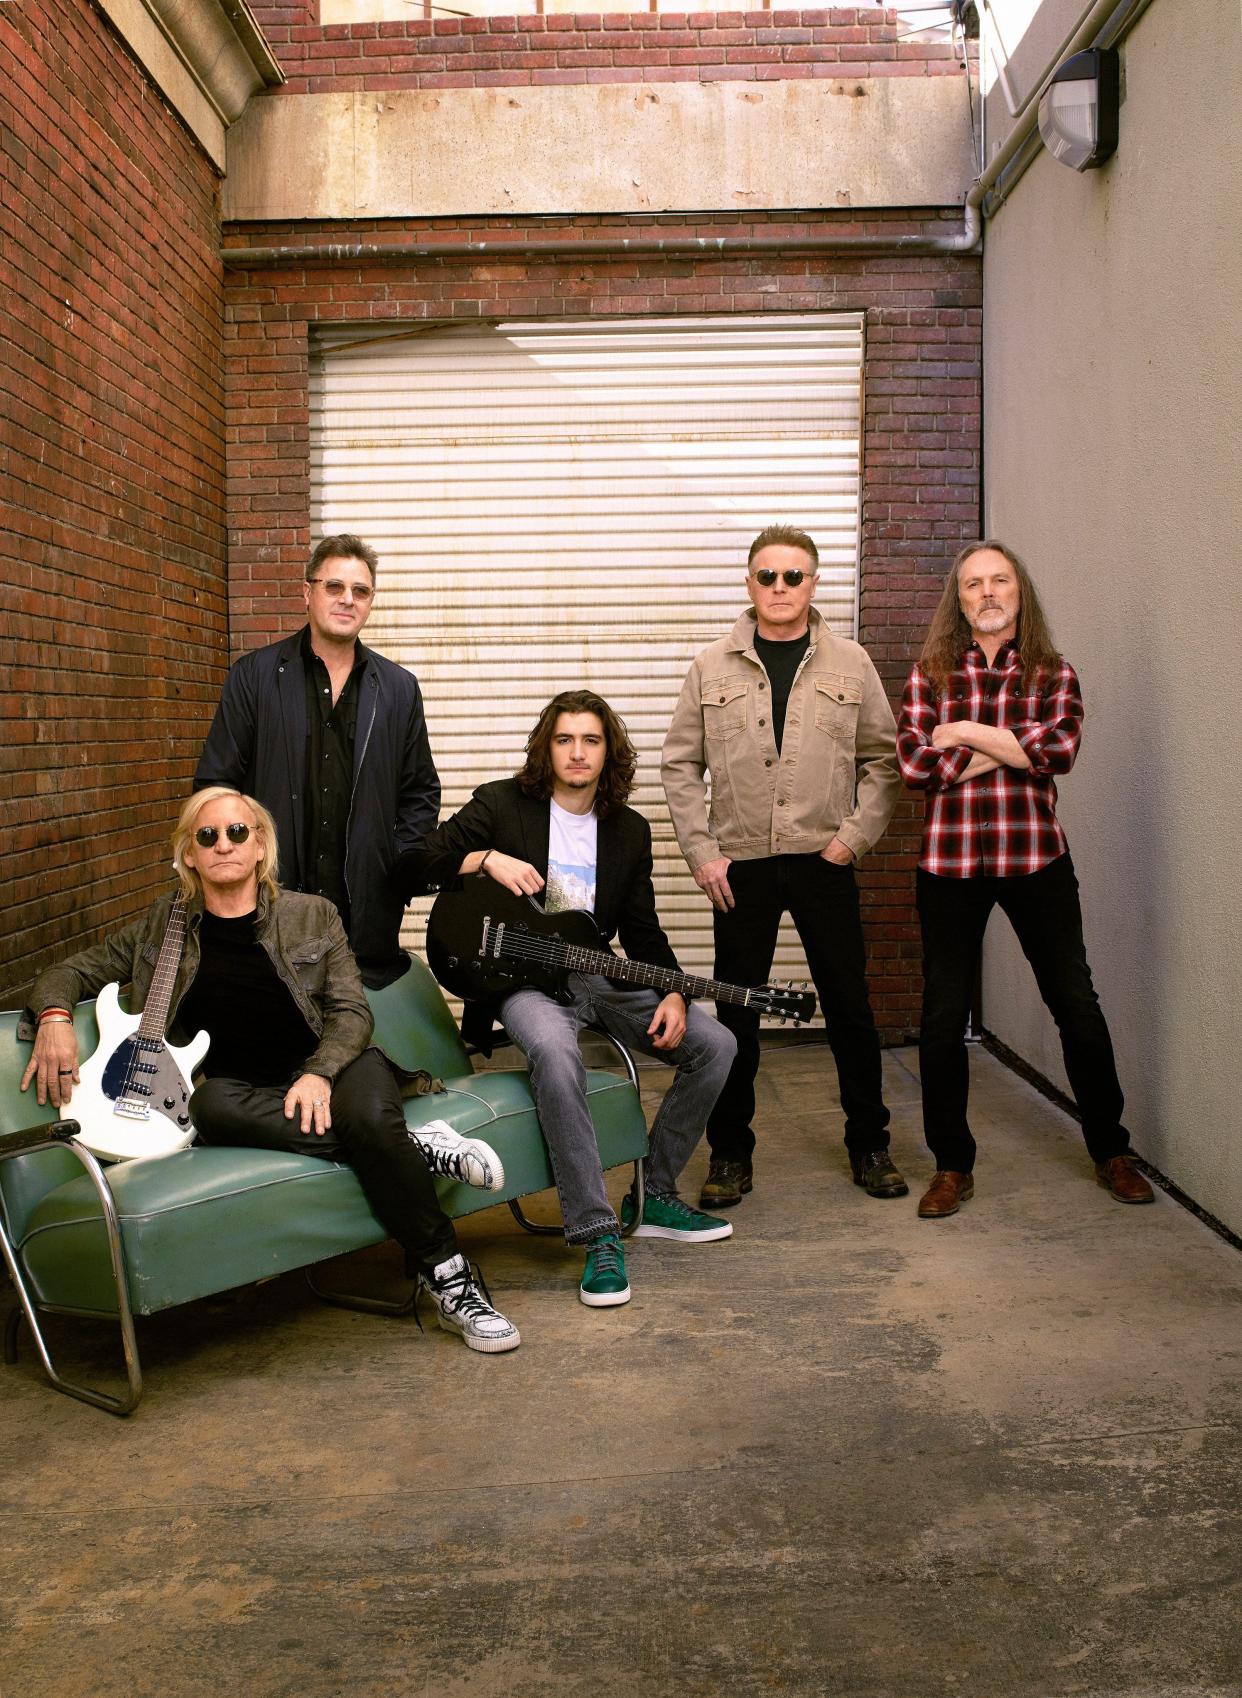 The Eagles announce farewell tour dates with Steely Dan 'The time has